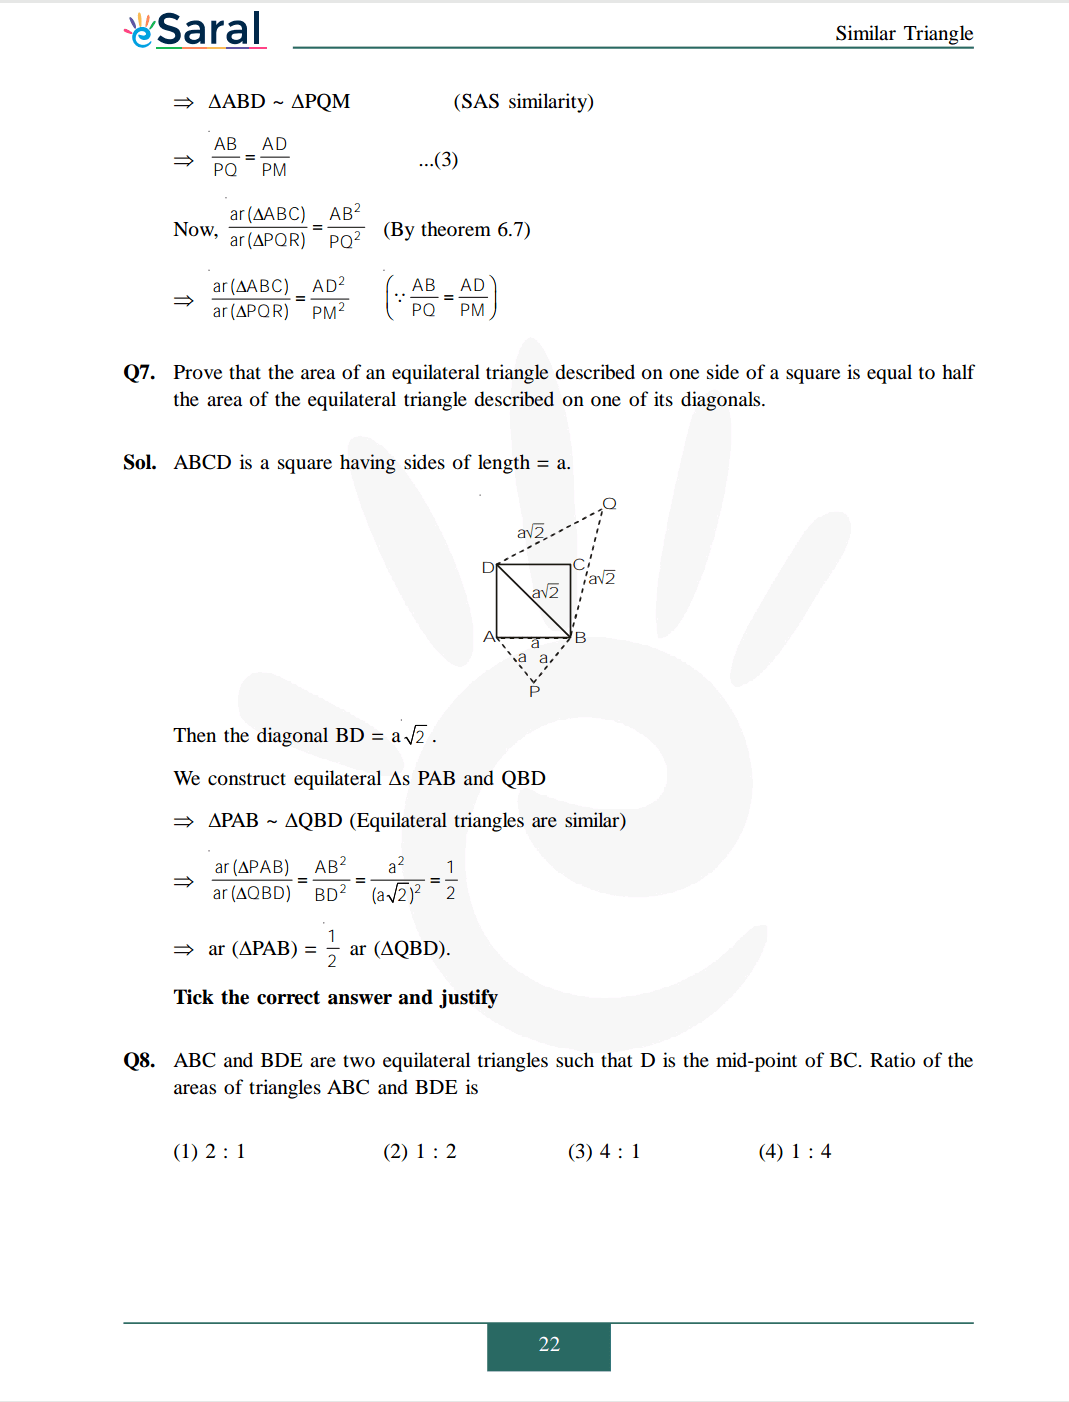 Class 10 Maths Chapter 6 exercise 6.4 solutions Image 4